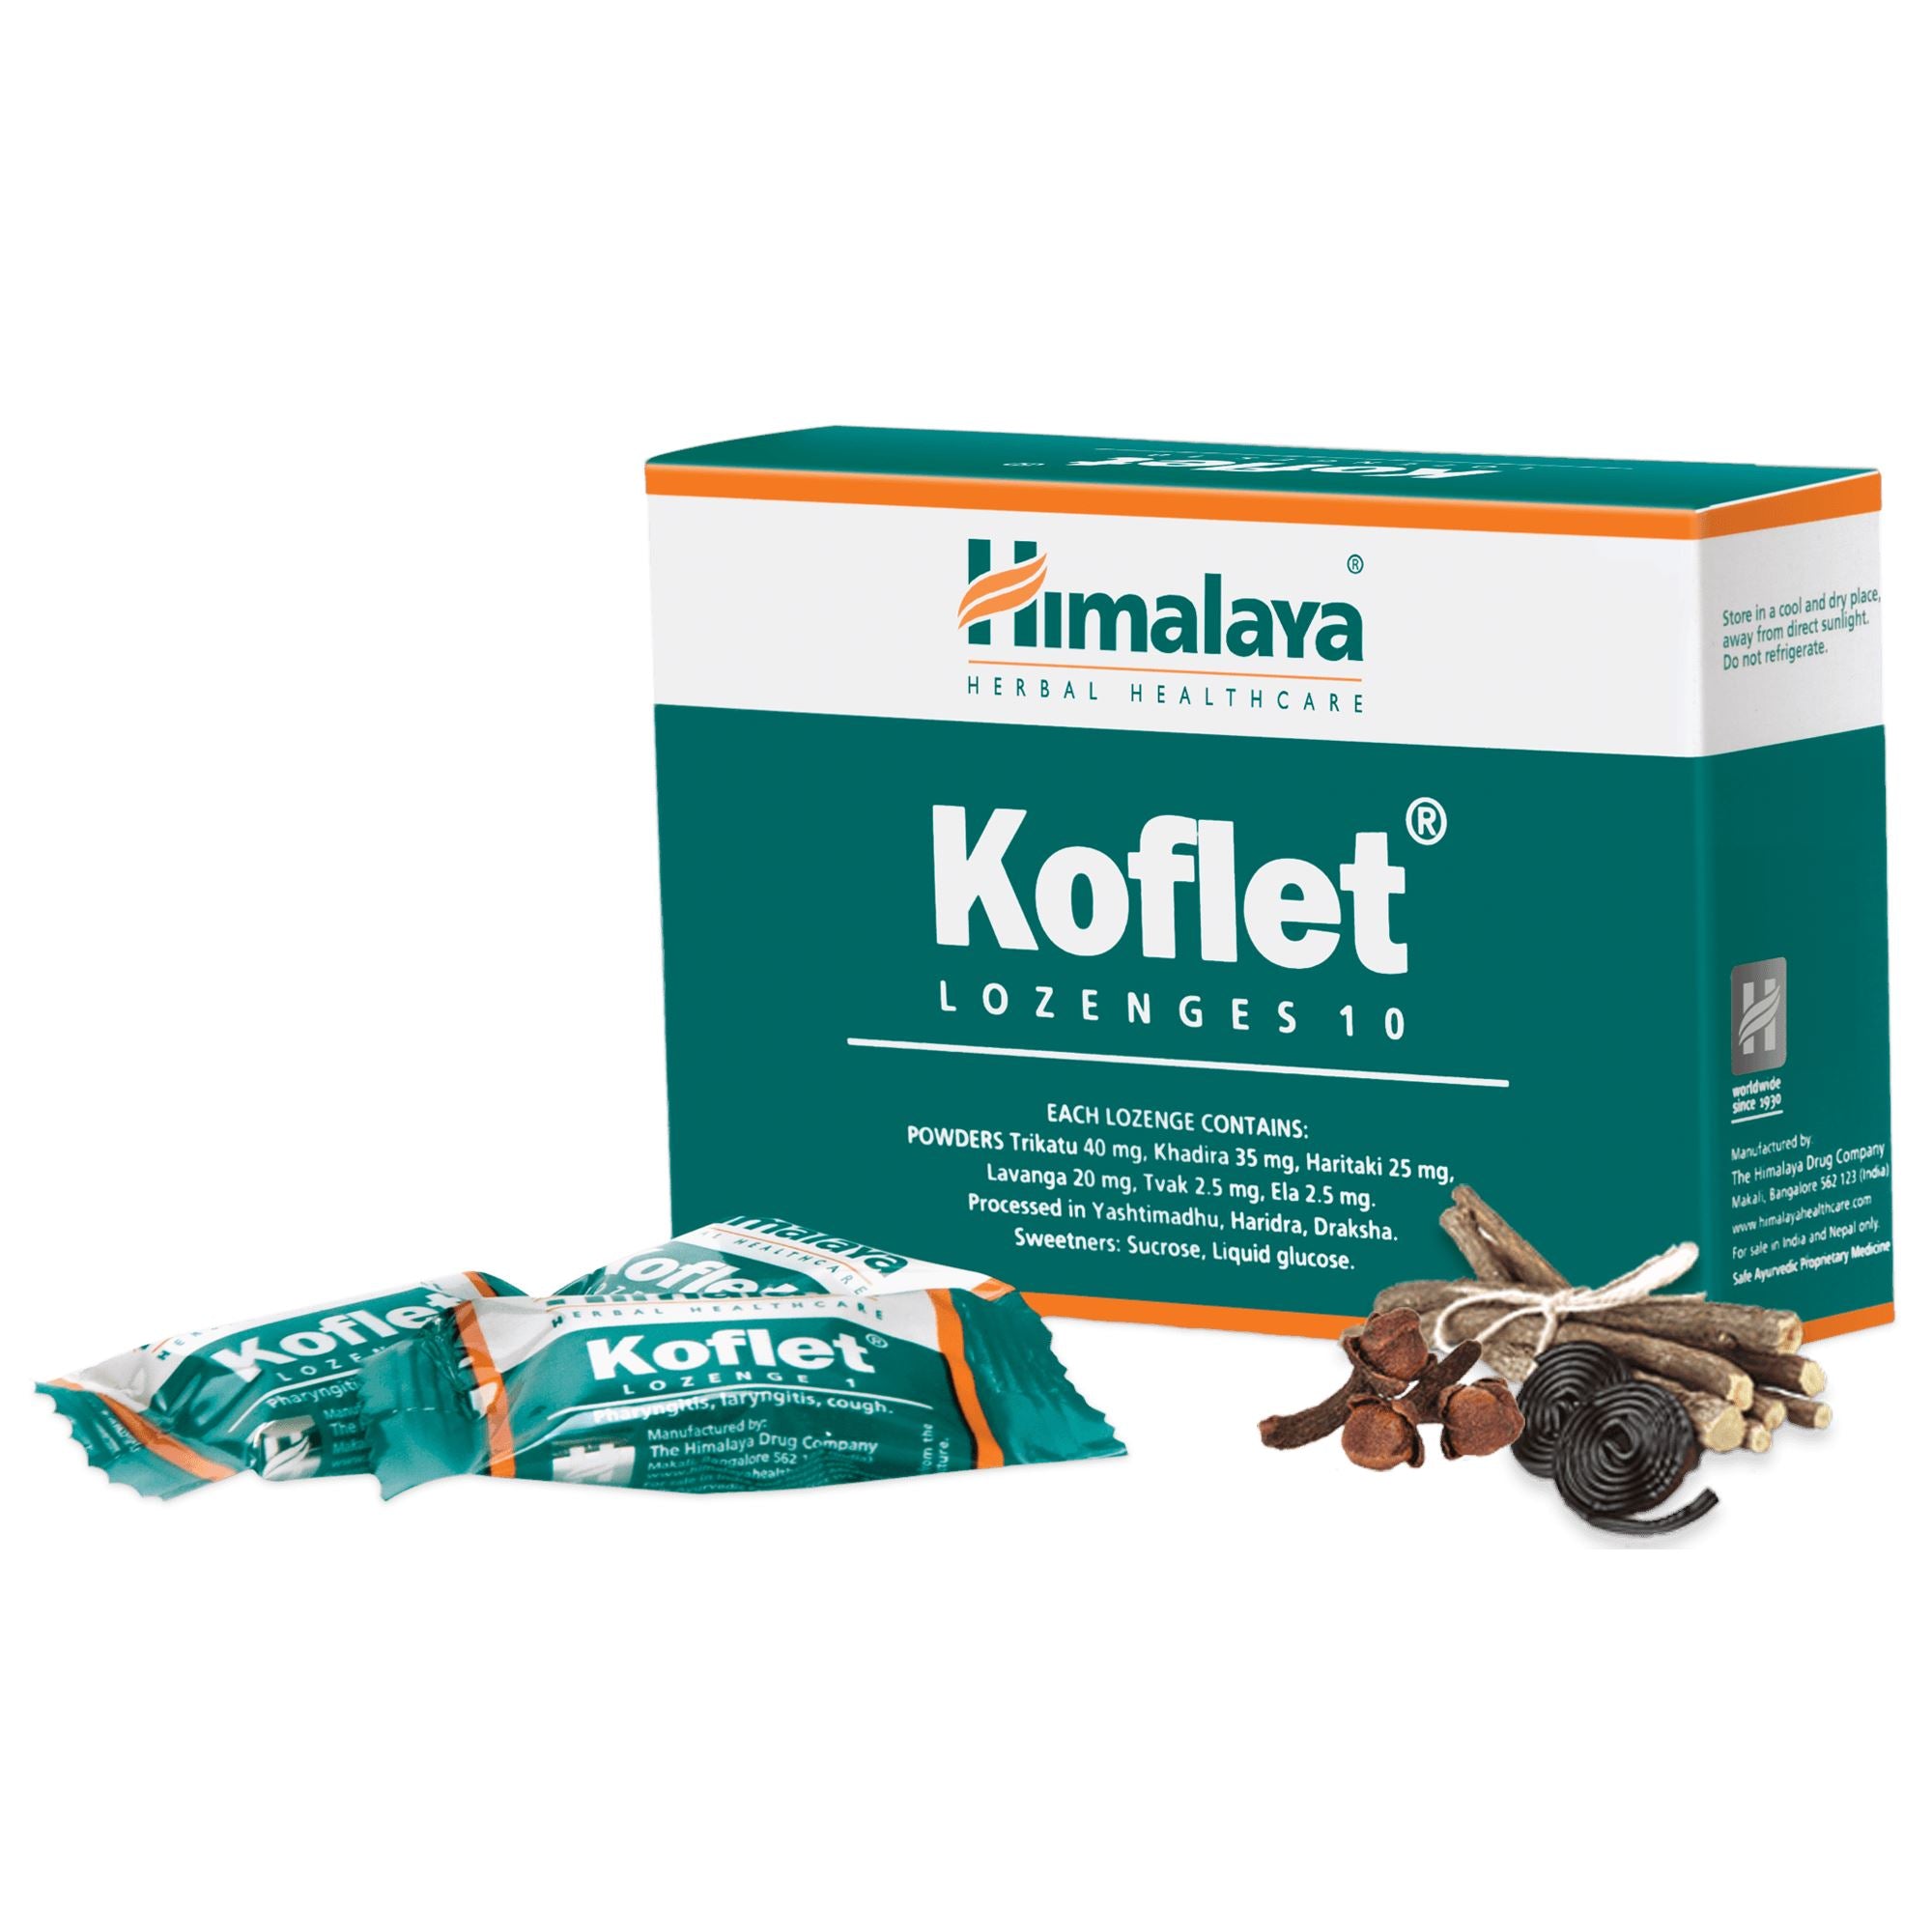 Himalaya Koflet Lozenges - Helps relieve productive and dry cough